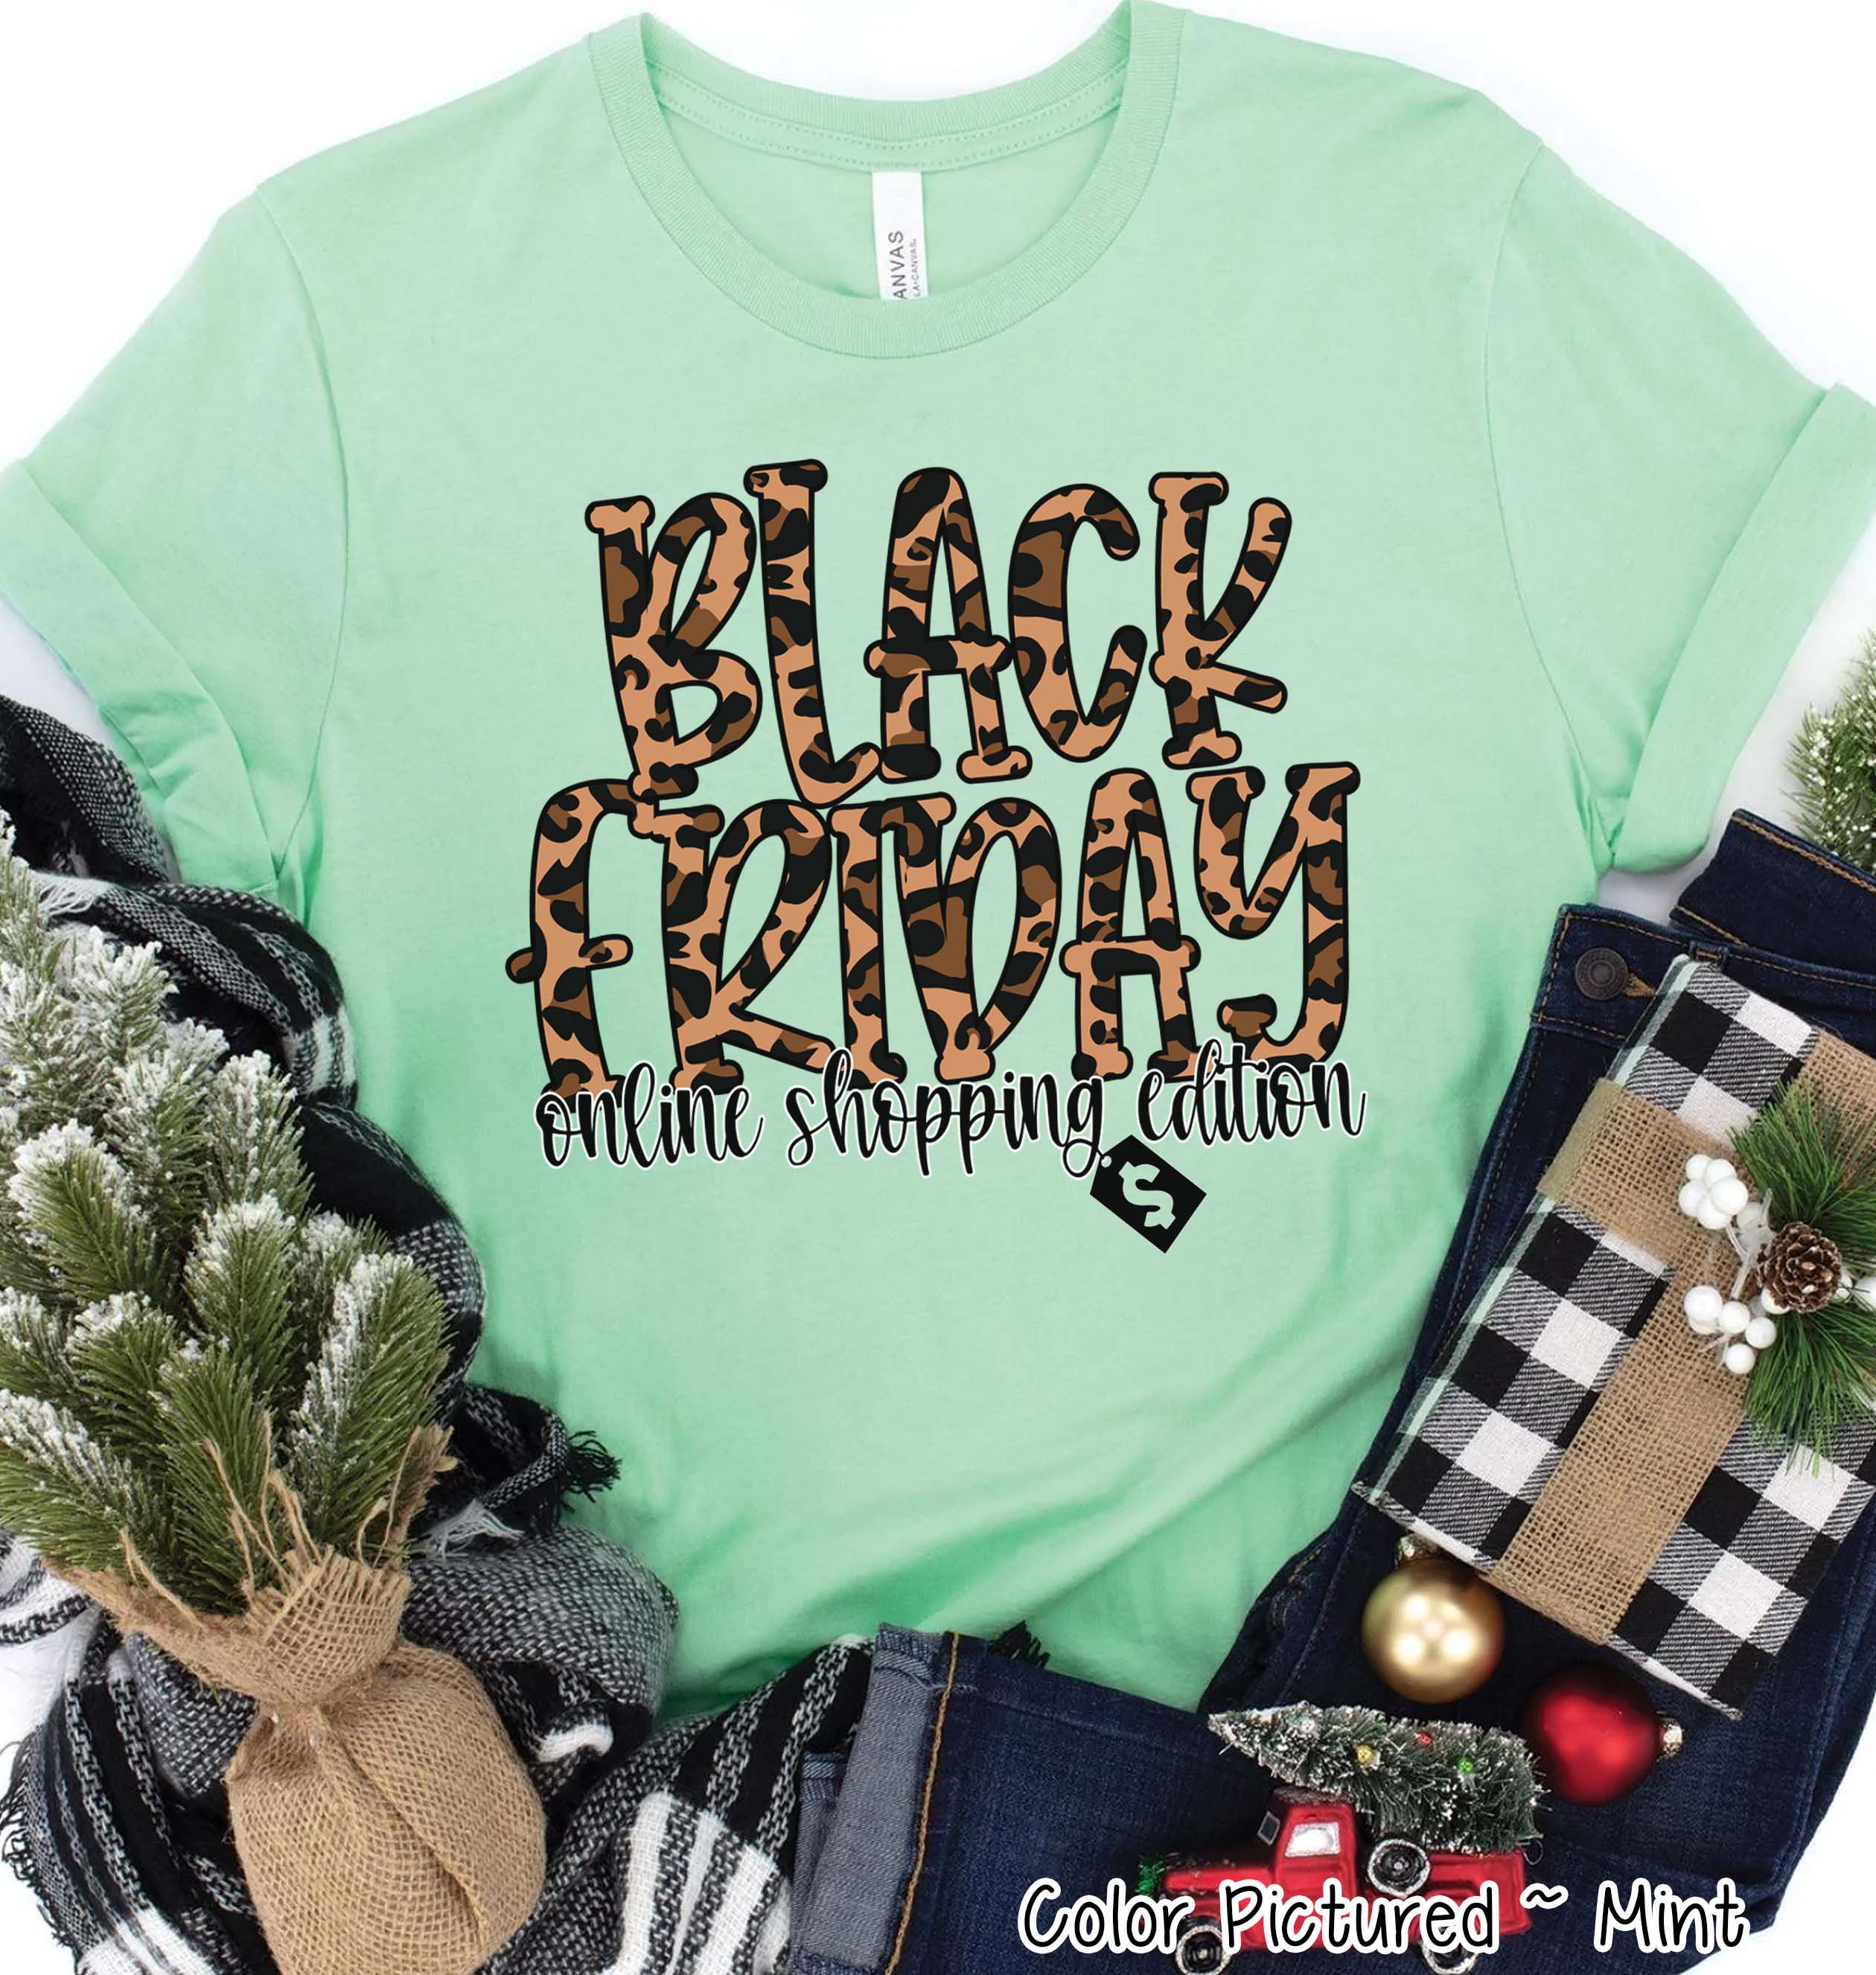 Black Friday Online Shoping Edition Holiday Tee